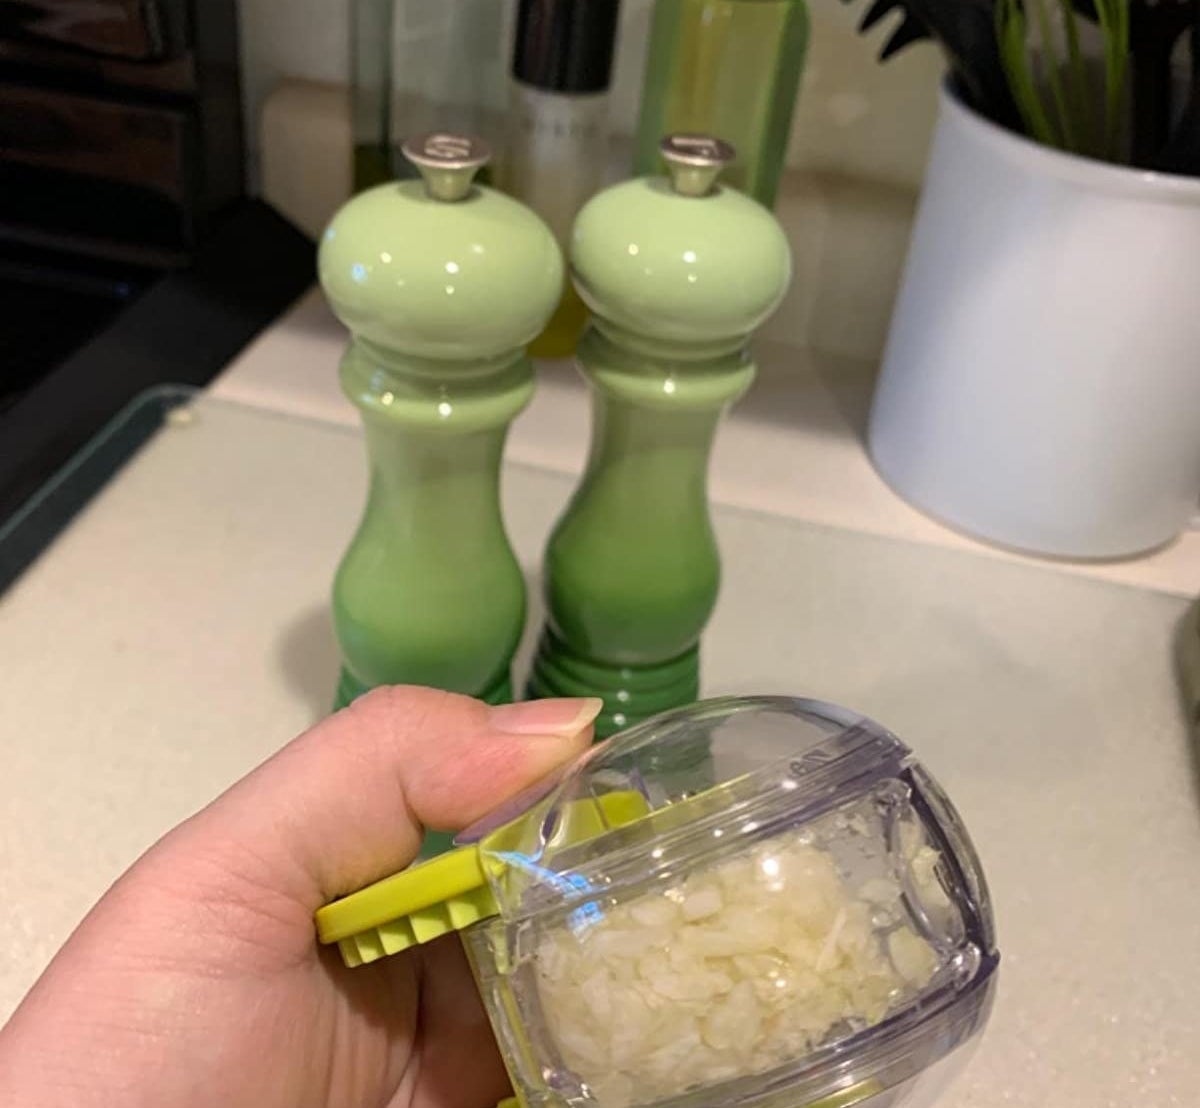 reviewer holding chopper filled with chopped garlic